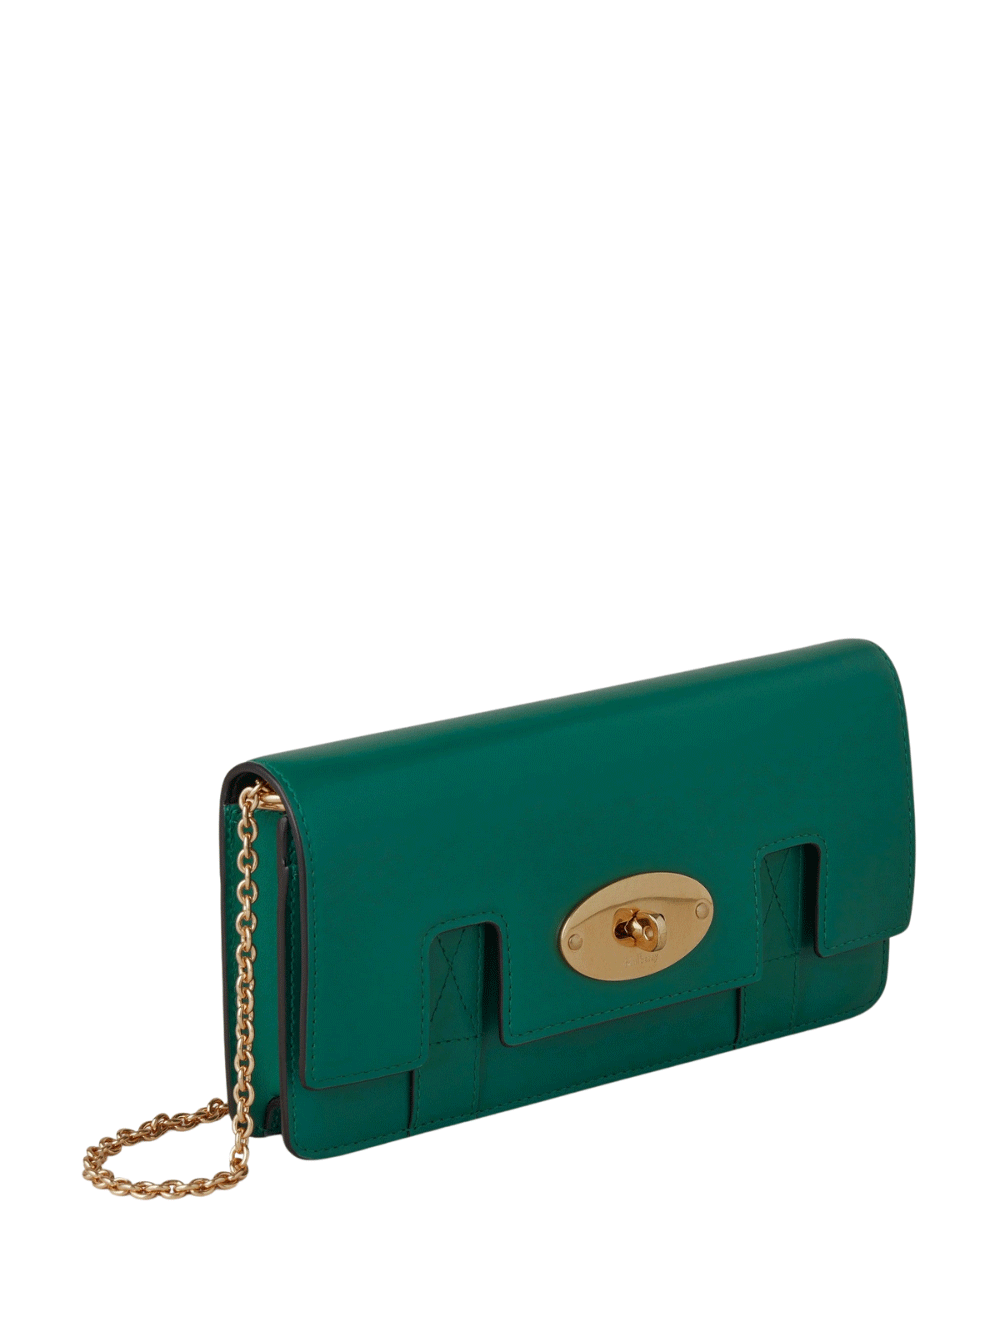 Mulberry-East-West-Bayswater-Clutch-Malachite-High-Gloss-Leather-Malachite-2